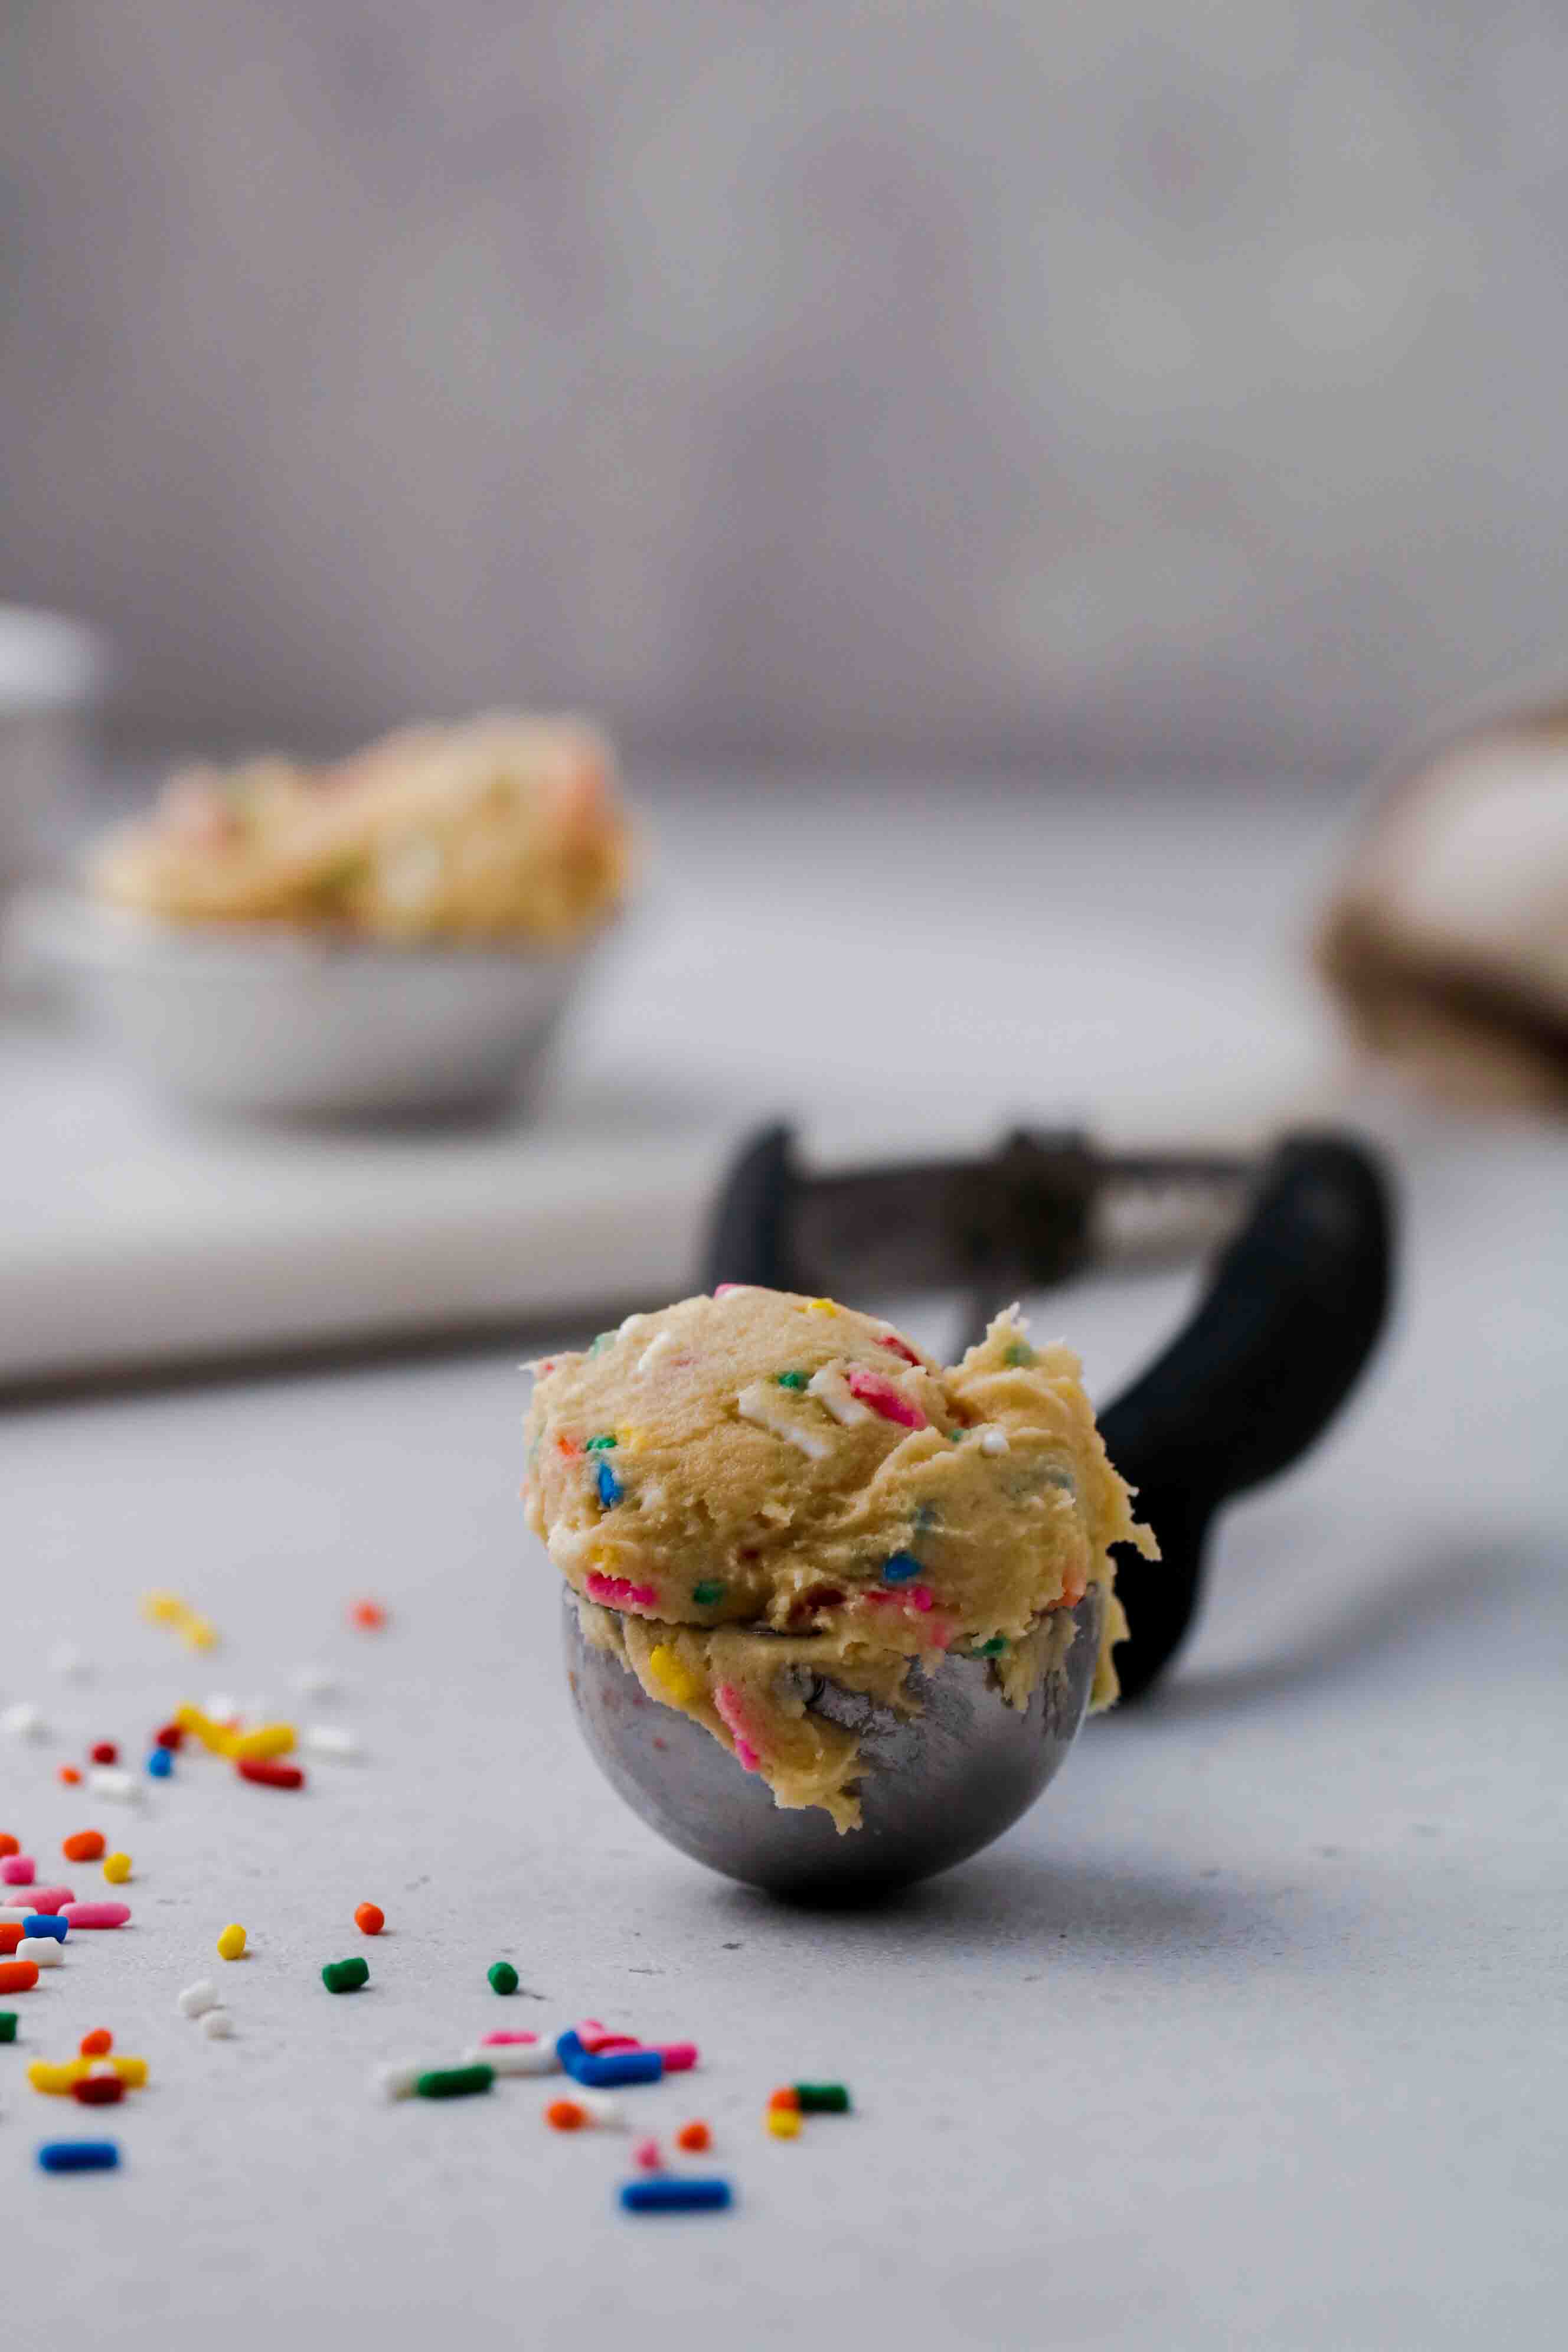 Ice cream scoop full of edible funfetti cookie dough for one